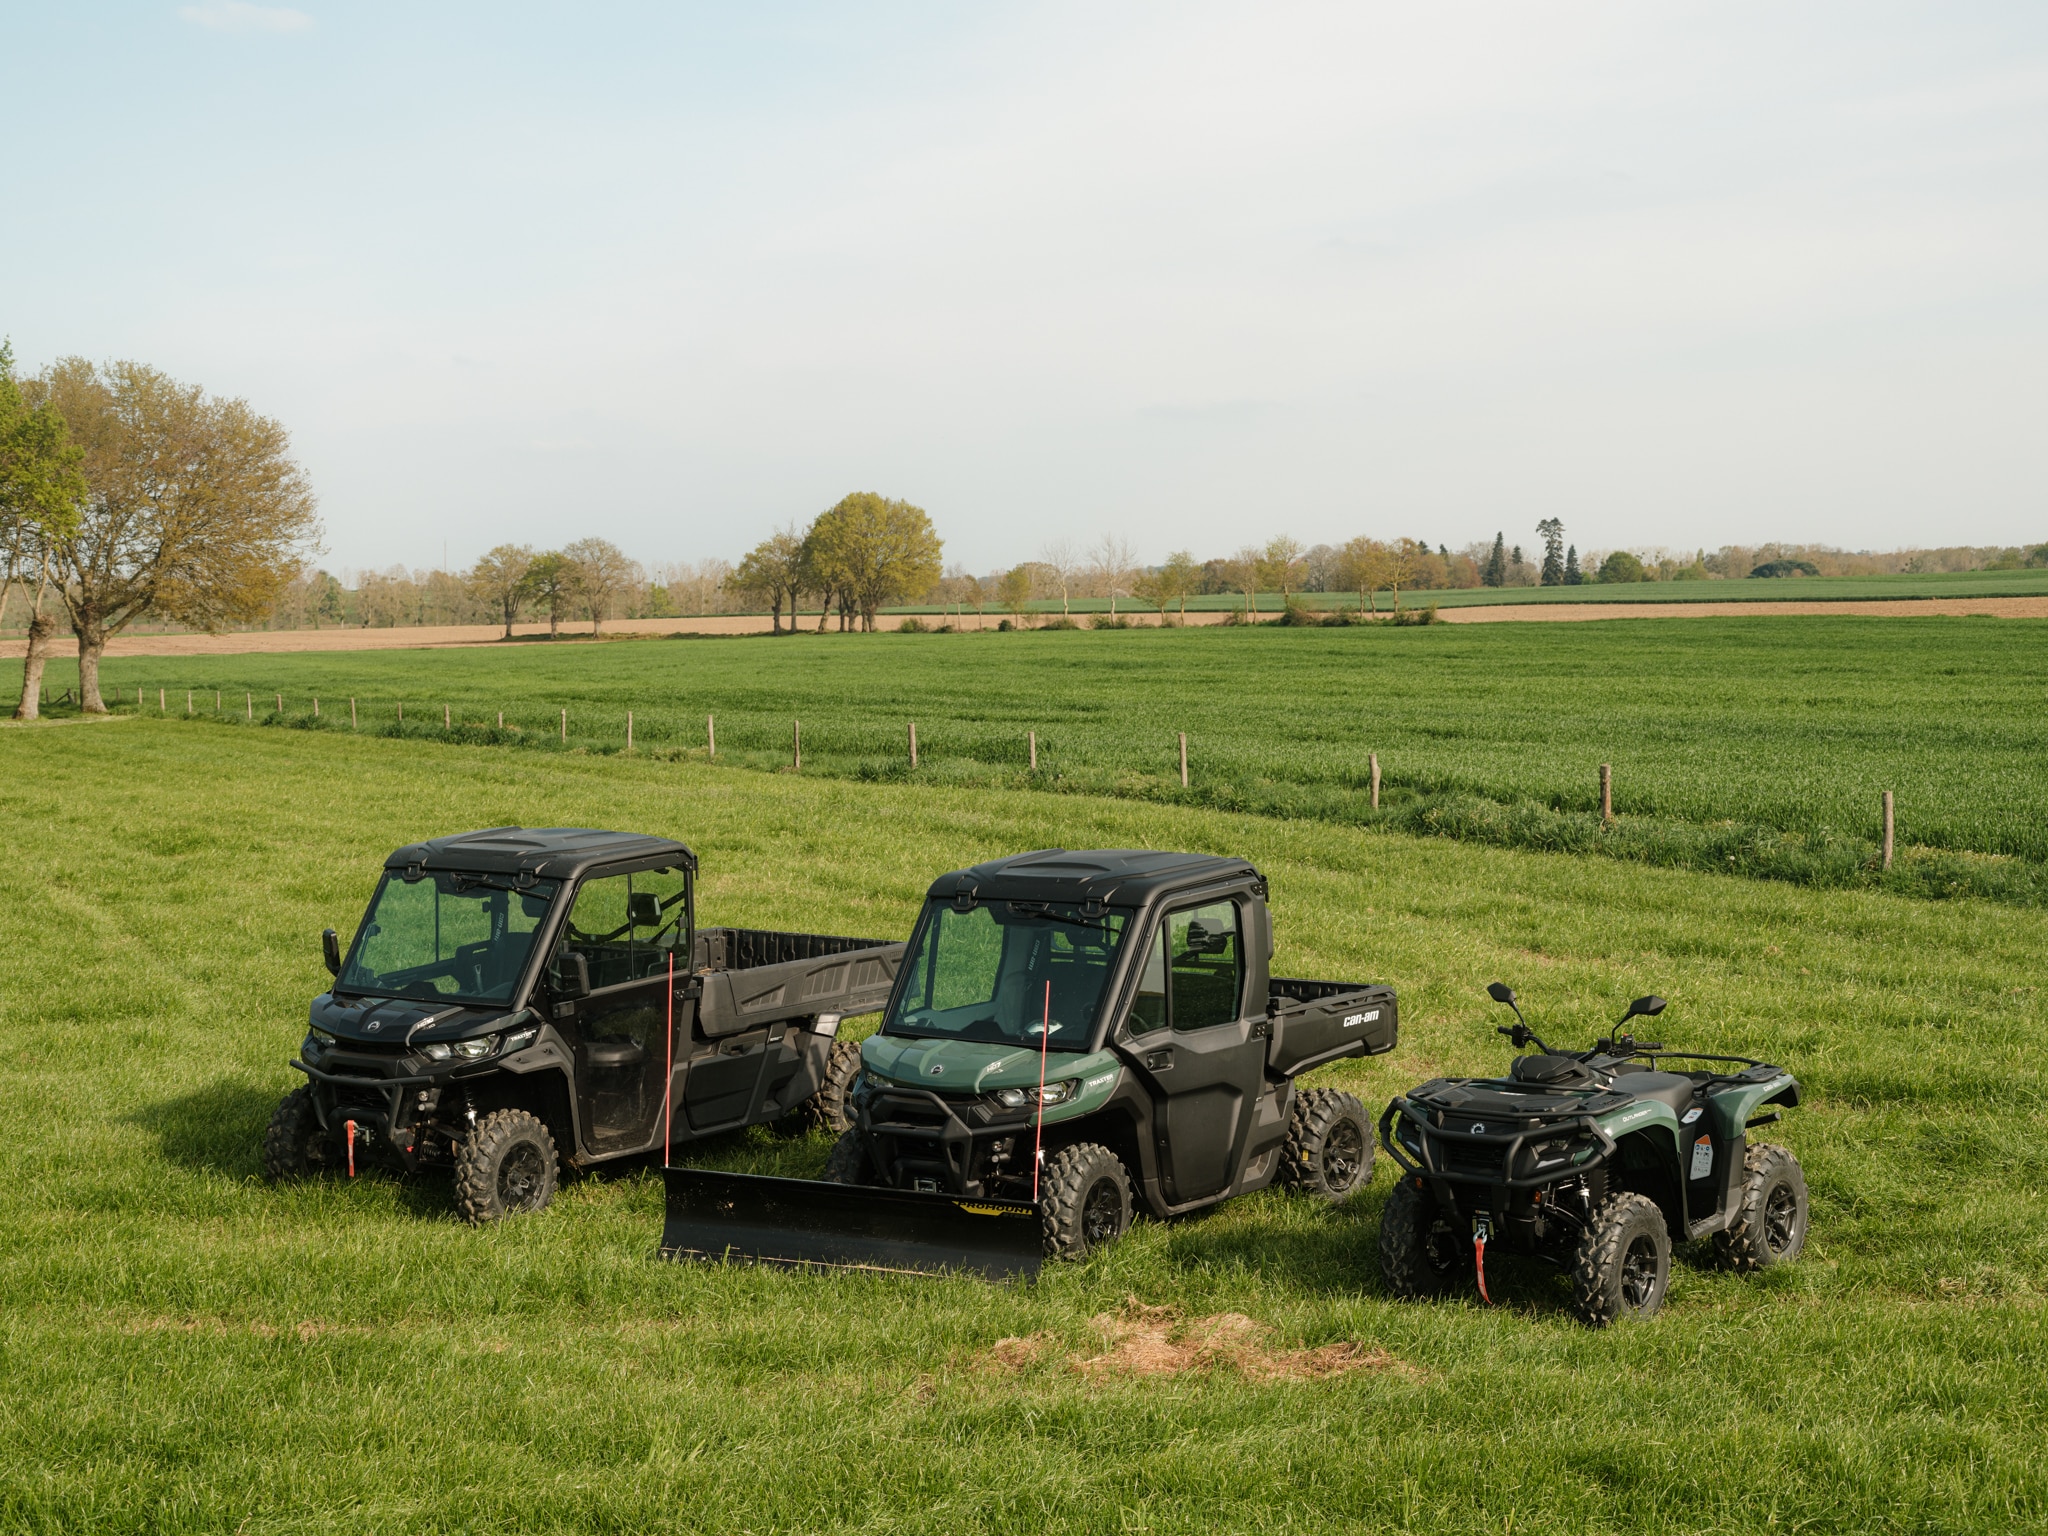 Traxters and Outlander in a field